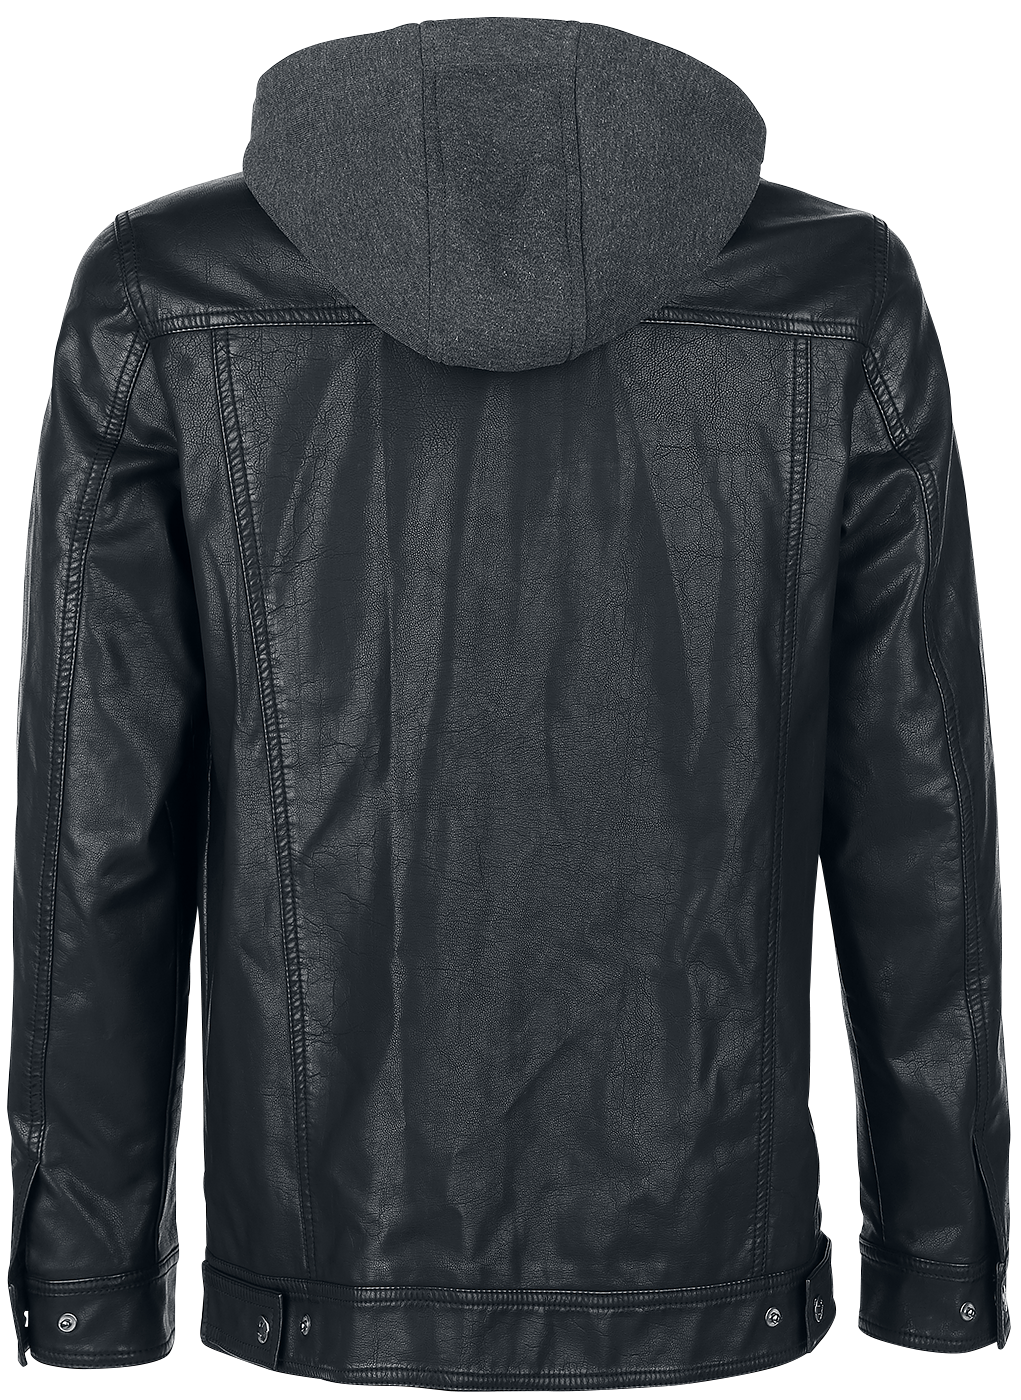 Leather jacket Hoodie Shell jacket - jacket png download - 1021*1400 ...